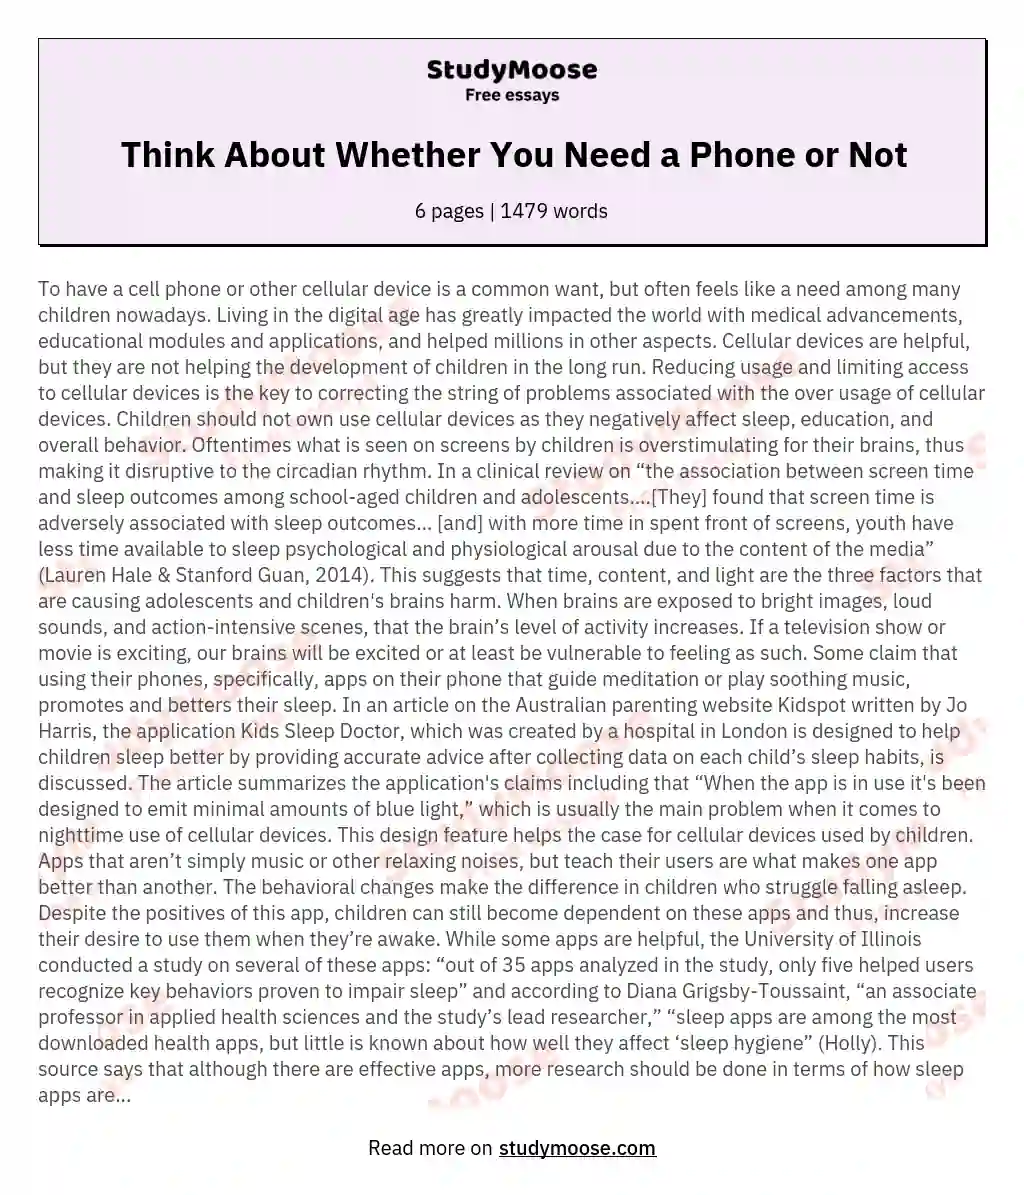 Think About Whether You Need a Phone or Not essay